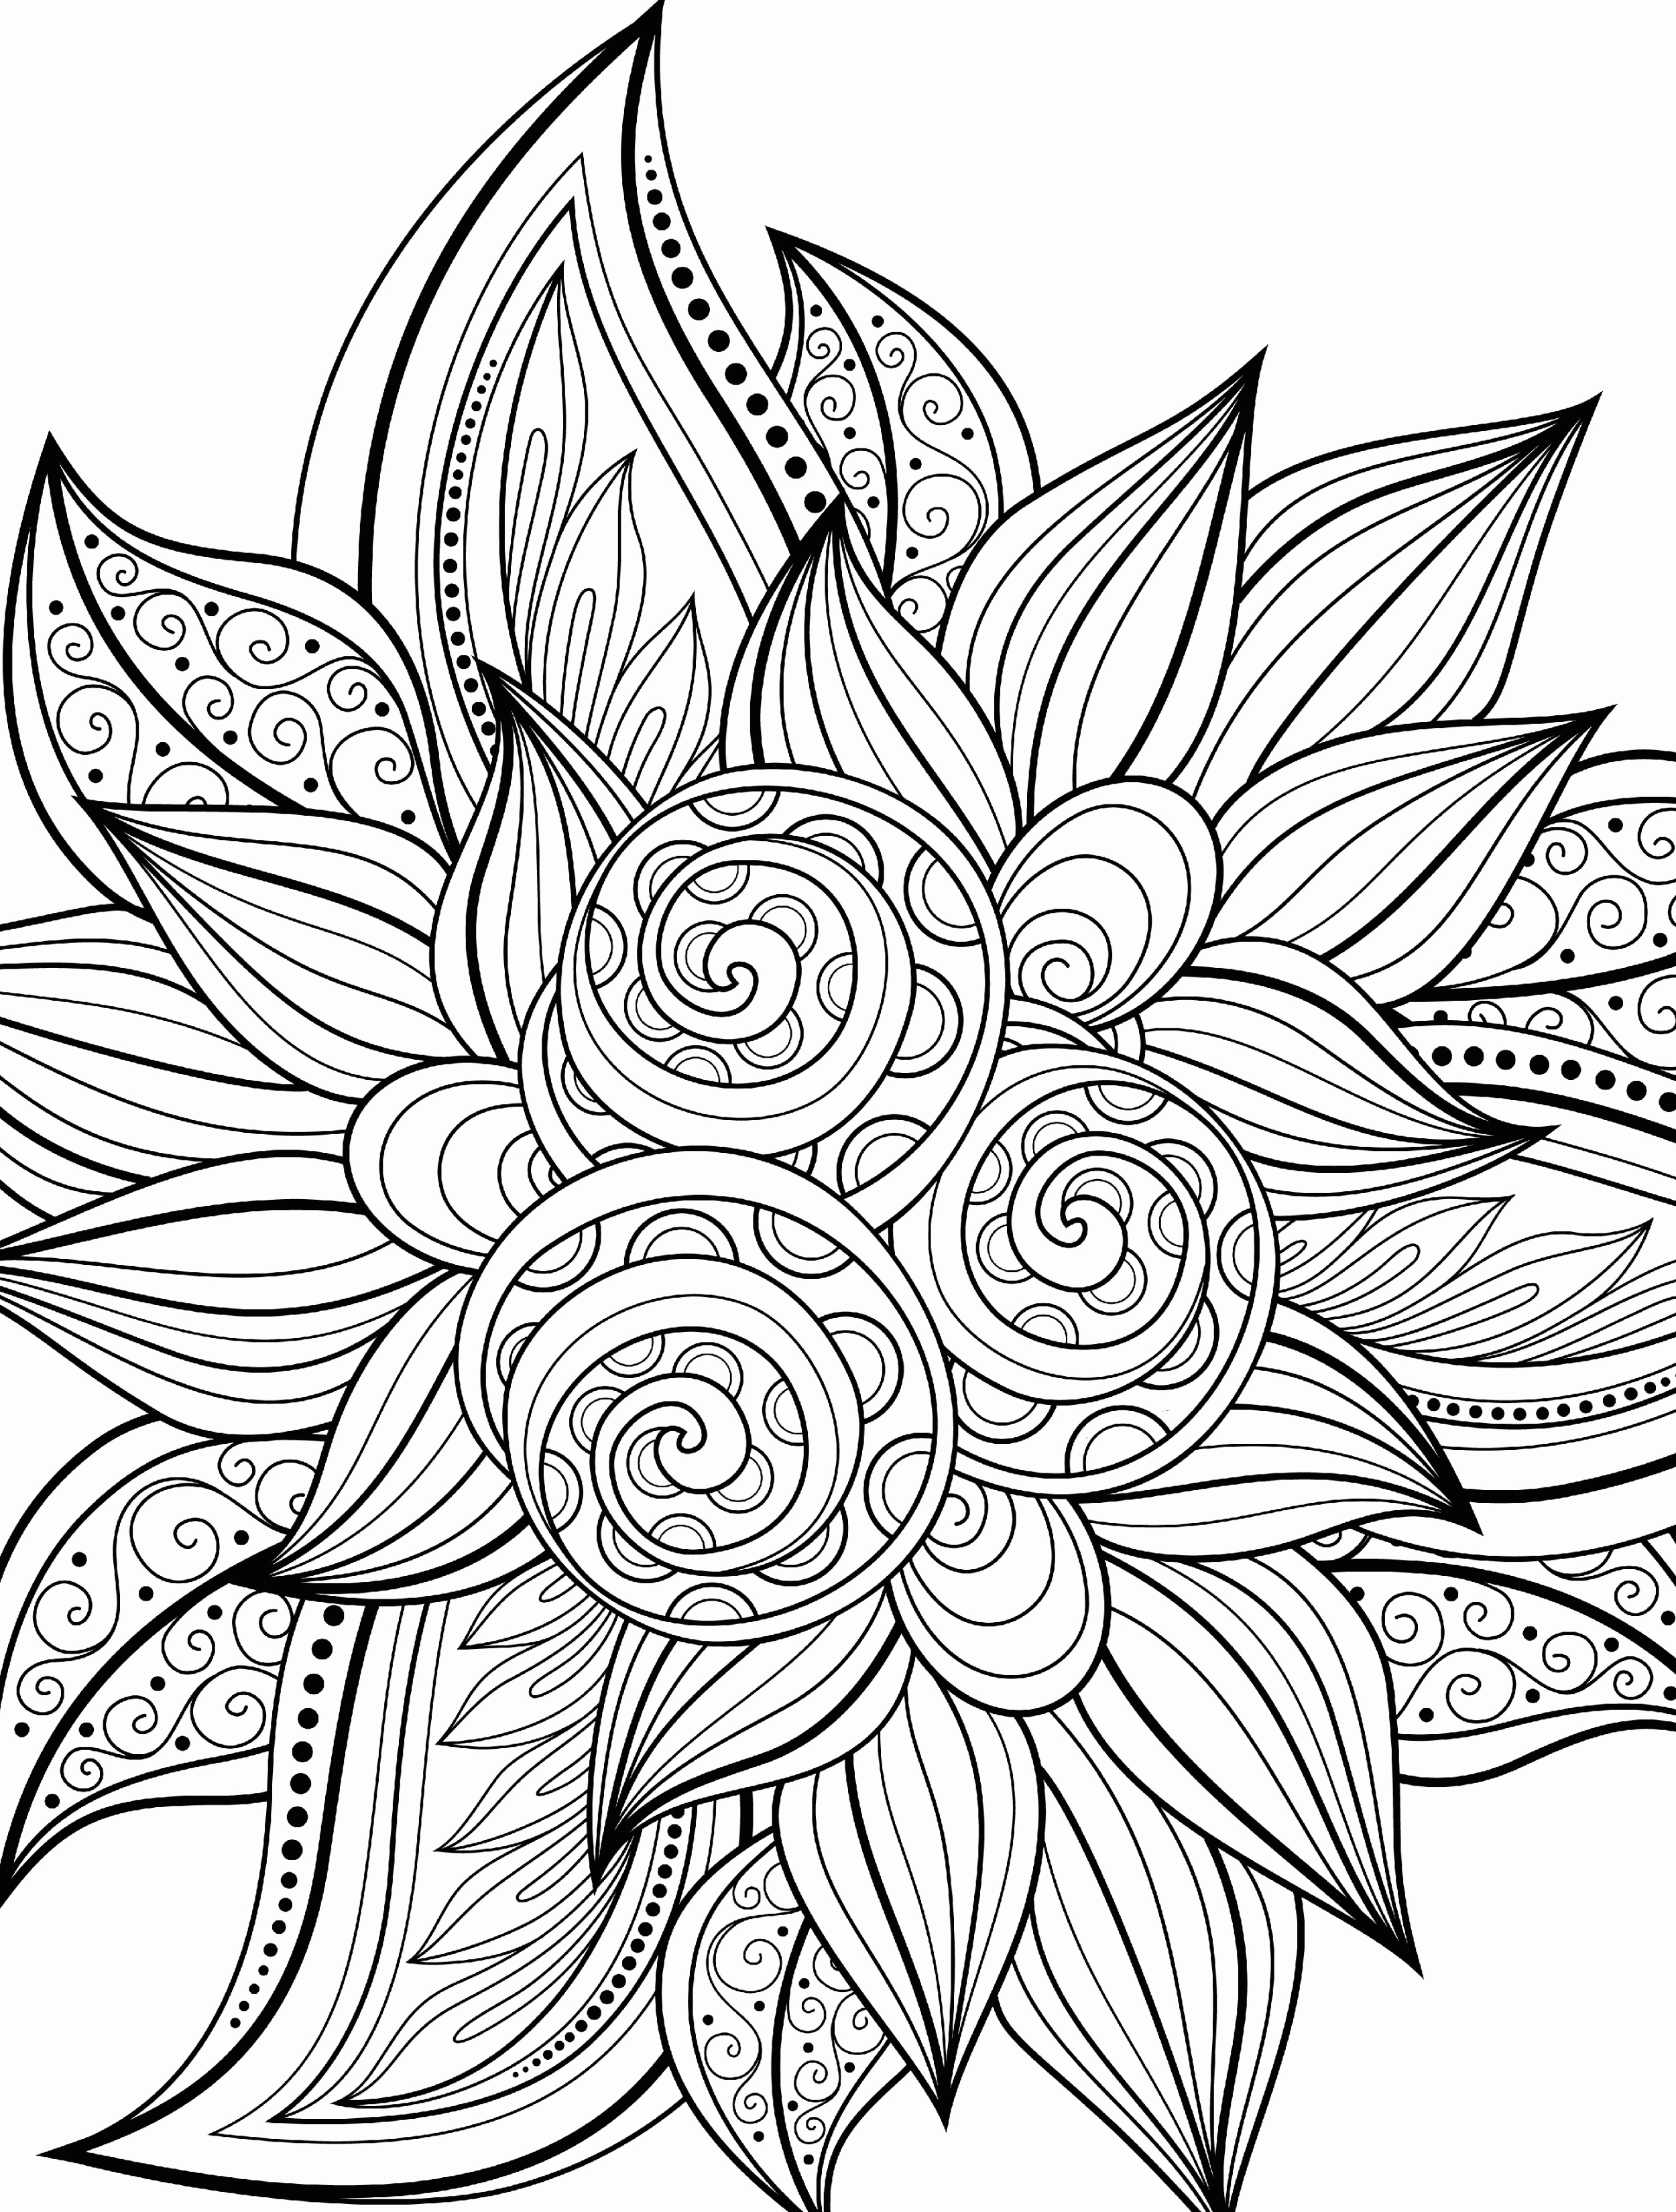 Free Printable Coloring Pages For Adults Only Image 48 Art